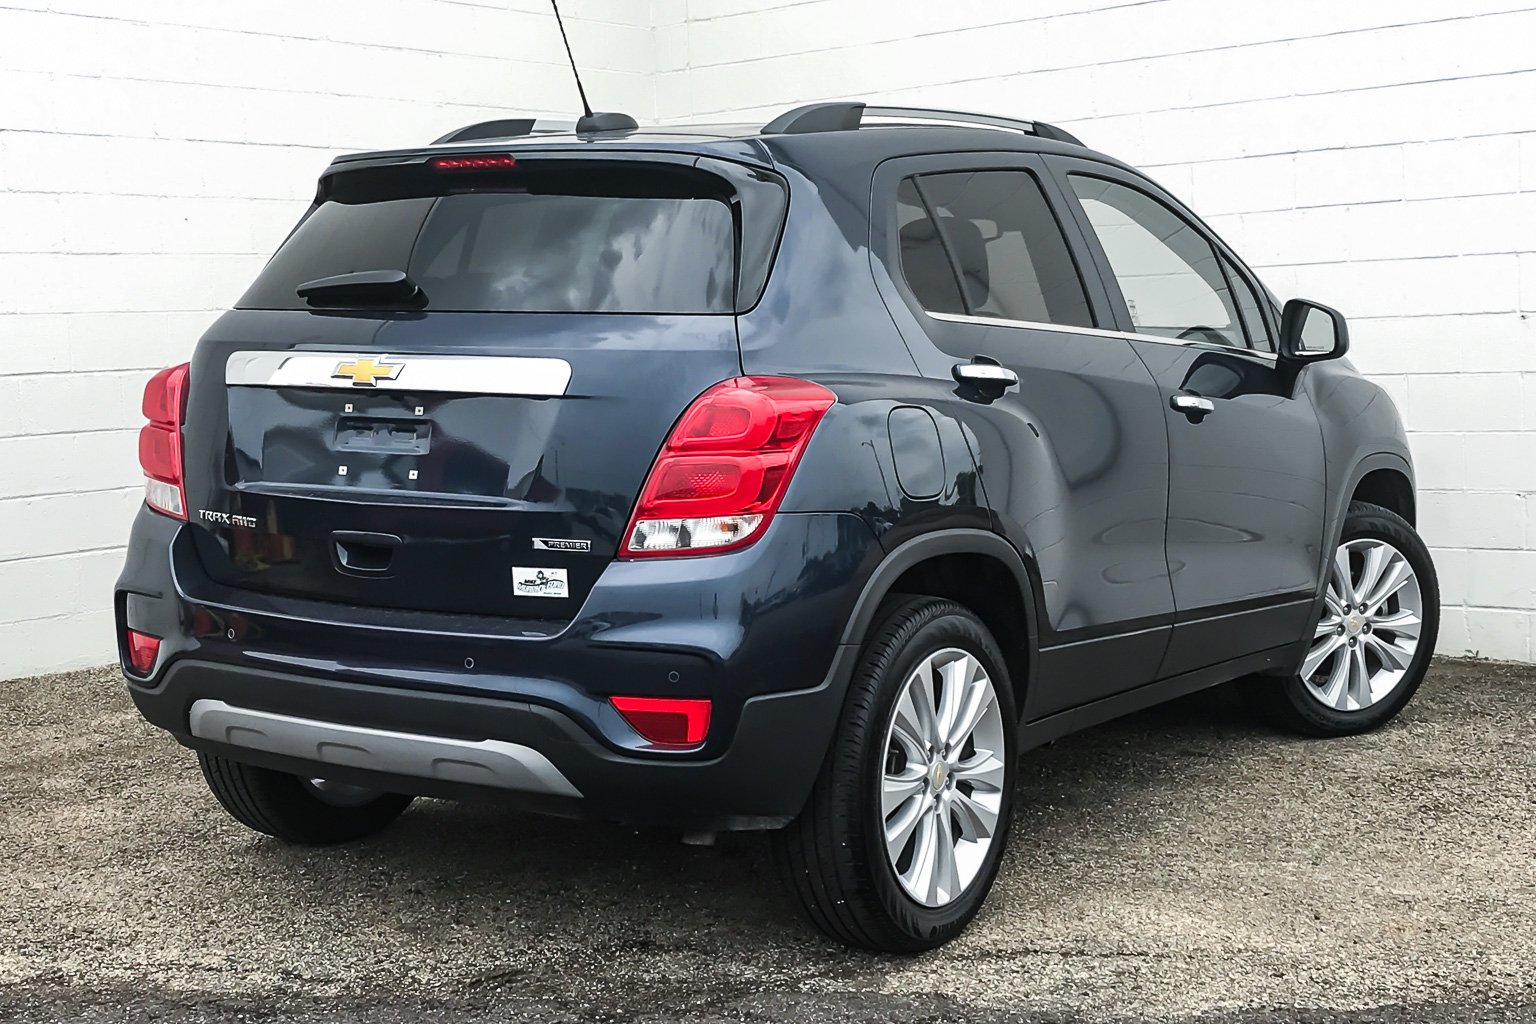 2018 chevrolet trax images